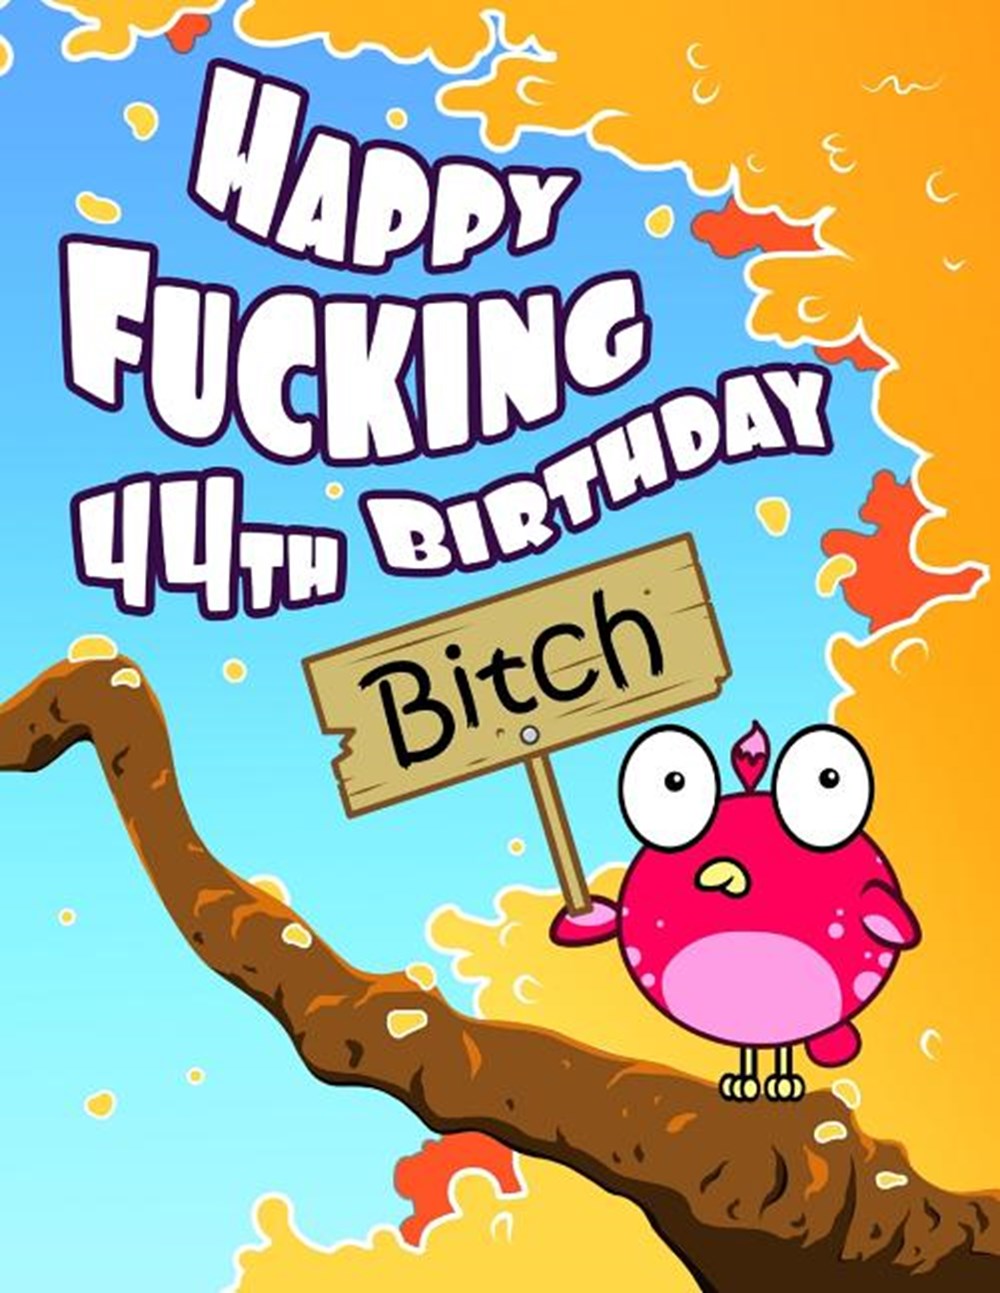 Happy Fucking 44th Birthday Bitch Sweet Sprinkled with Sassy...Forget the Funny Birthday Card and Gi